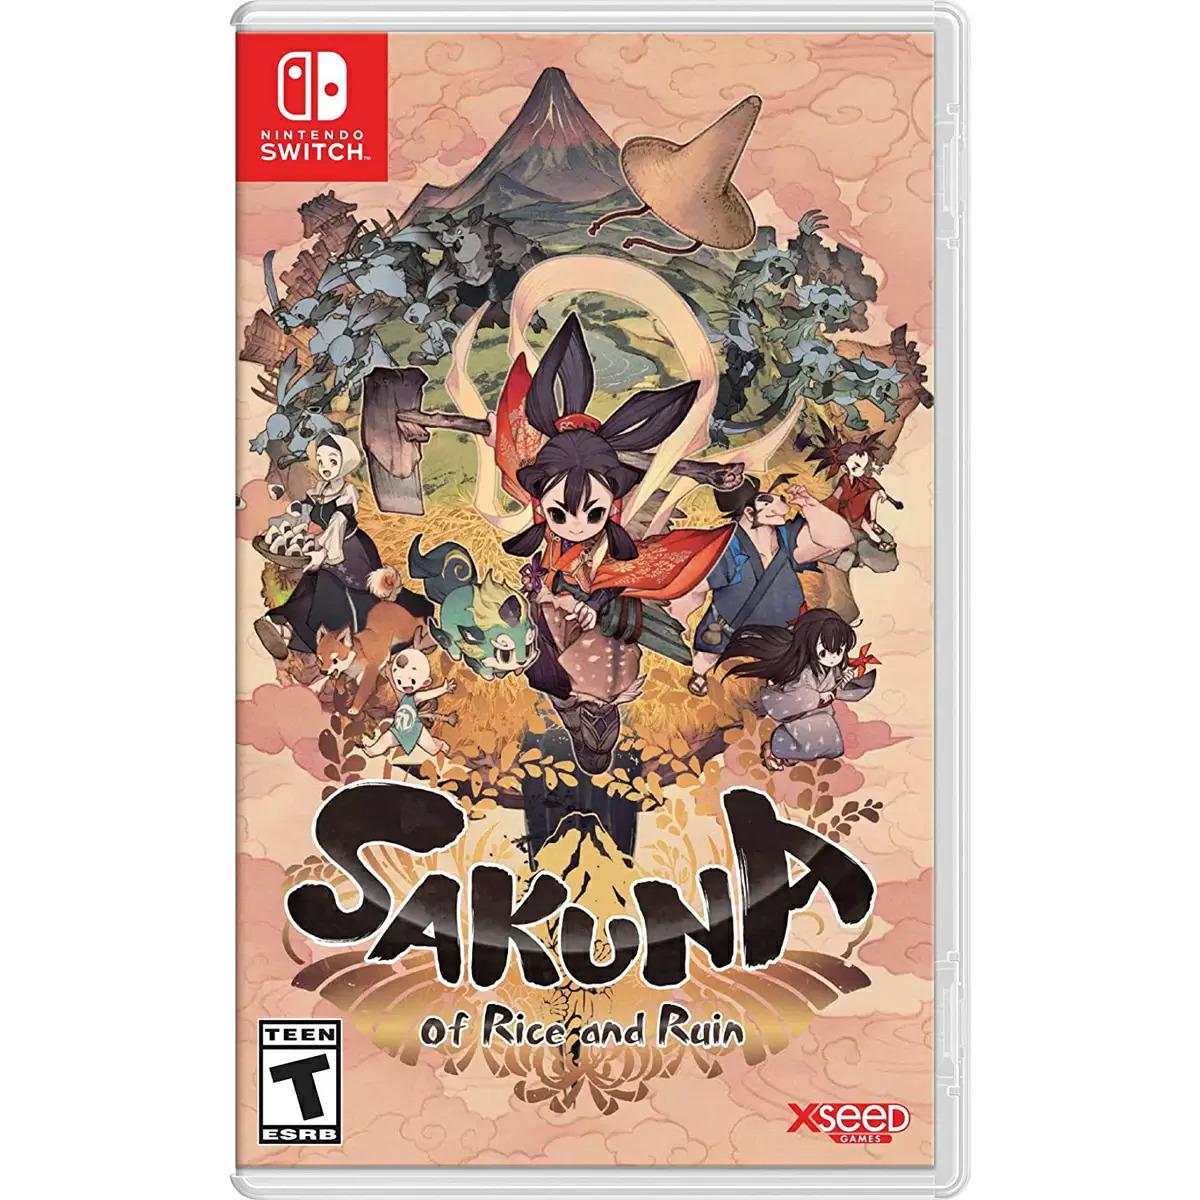 Sakuna of Rice and Ruin Nintendo Switch for $19.99